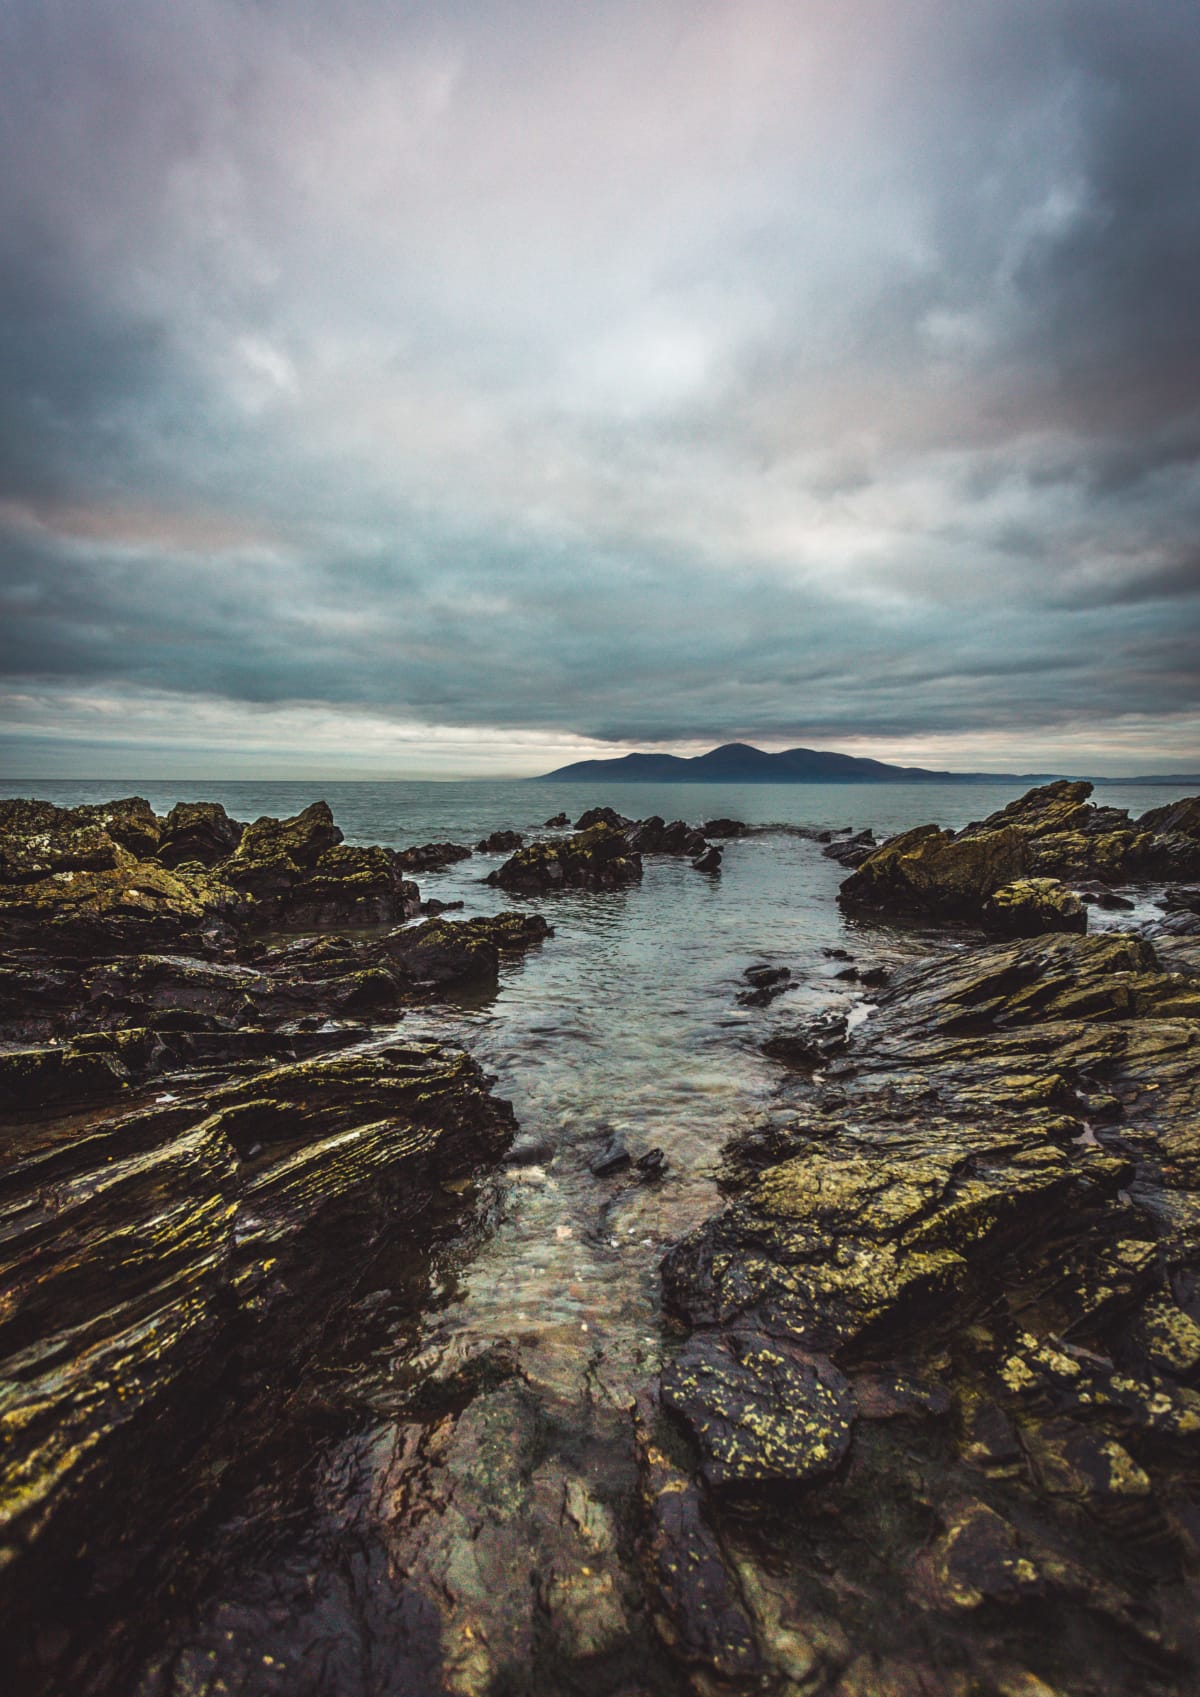 A view of the Mourne Mountains silhouette beside a rocky coastline